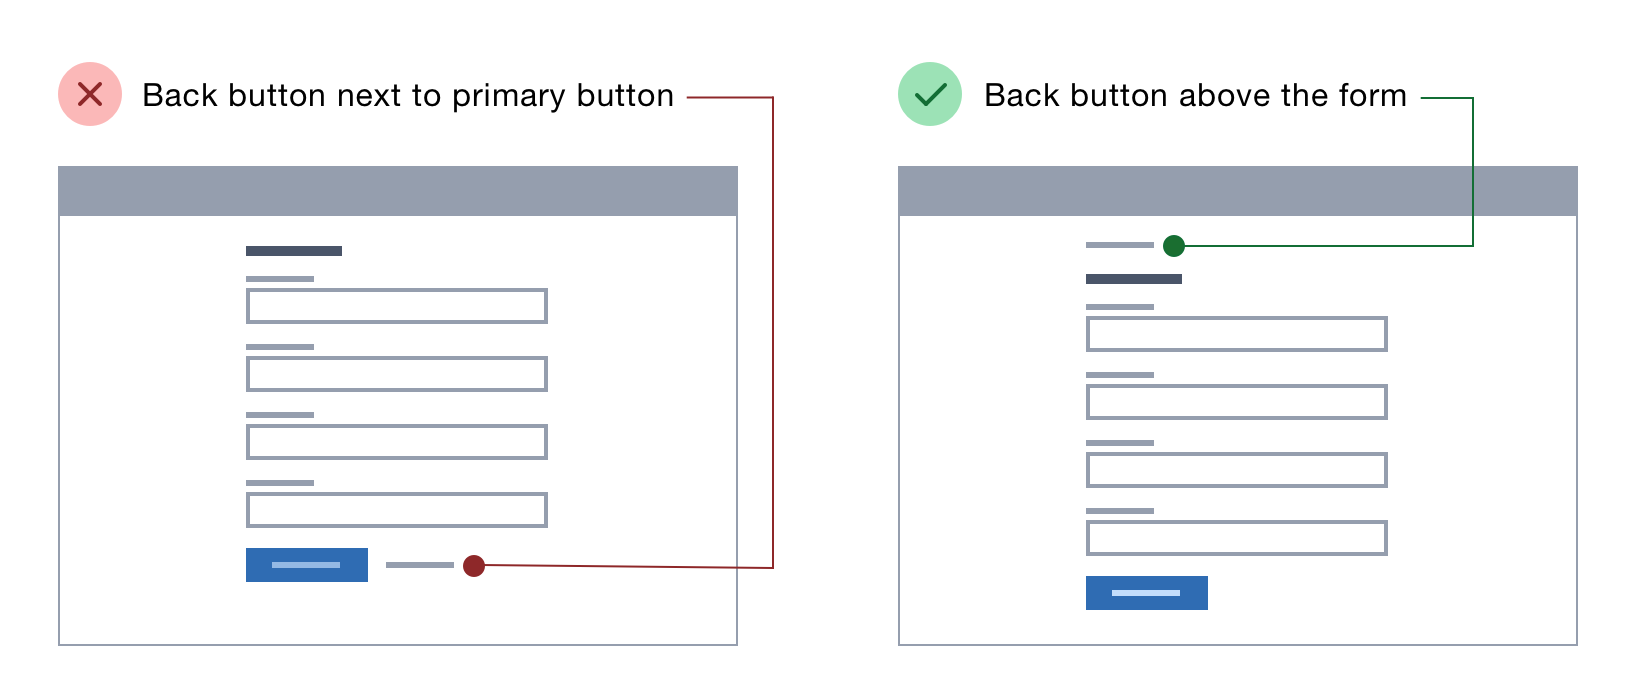 Where to put buttons on forms – Adam Silver – Designer, London, UK.